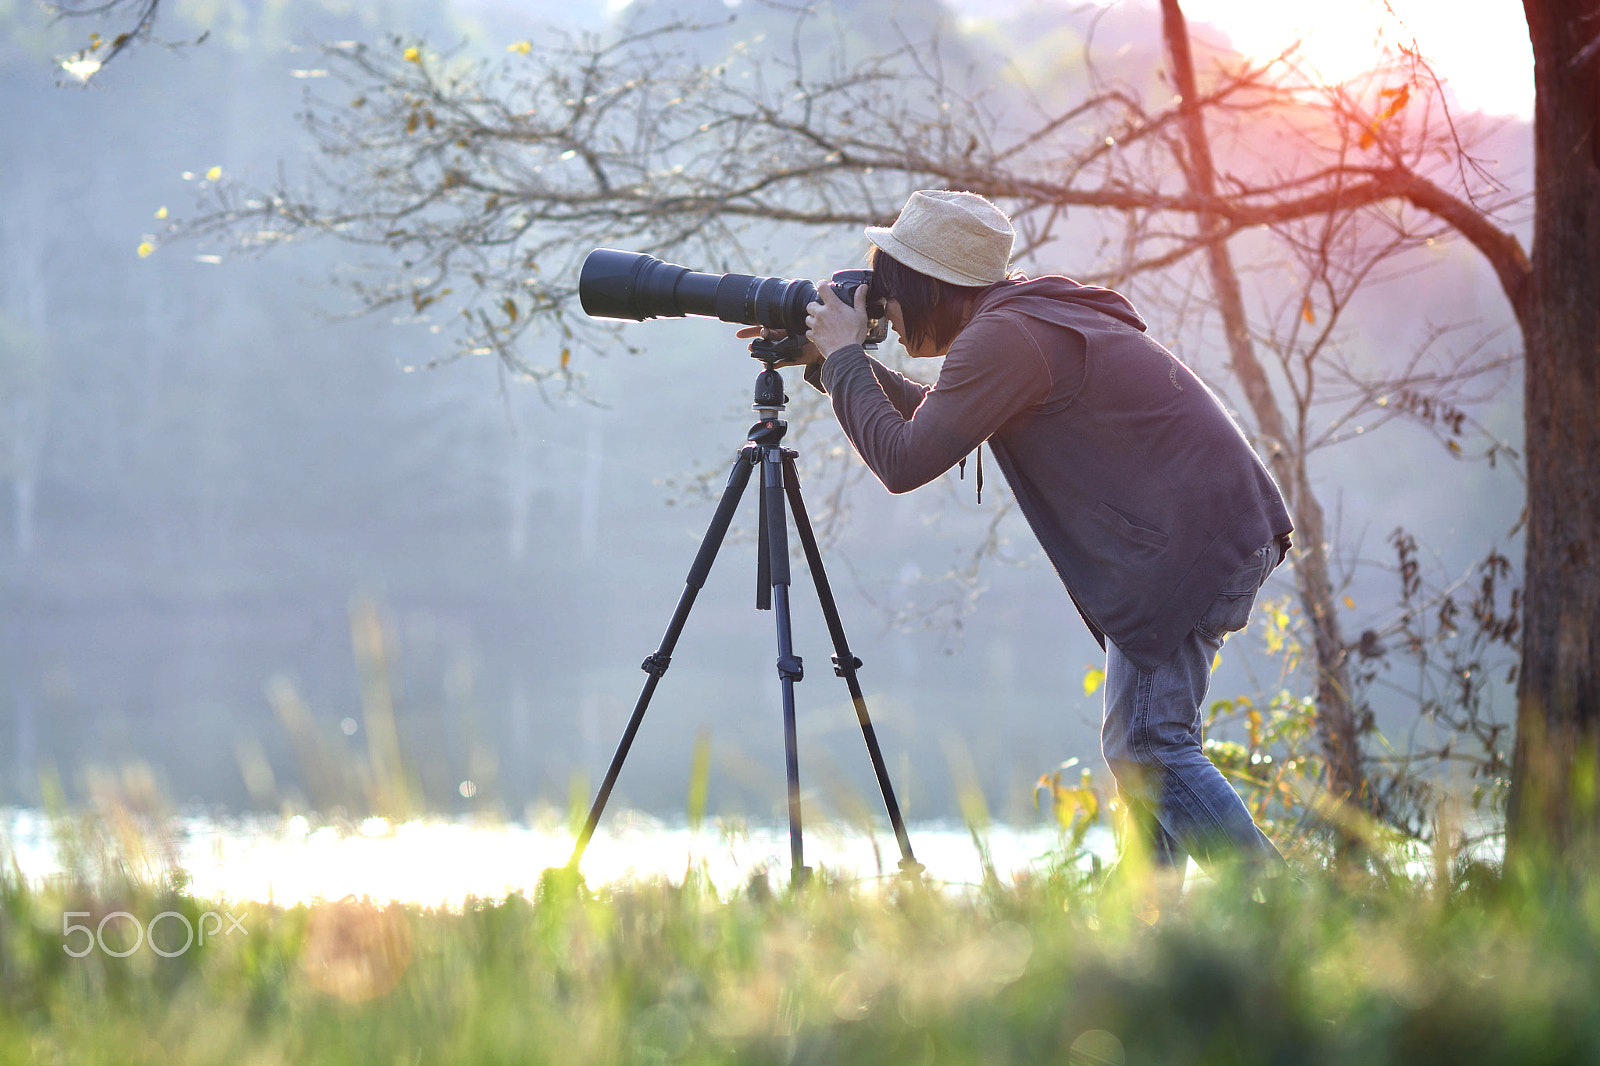 Nikon D7100 sample photo. Photographer in action with telephoto lens at morning light photography